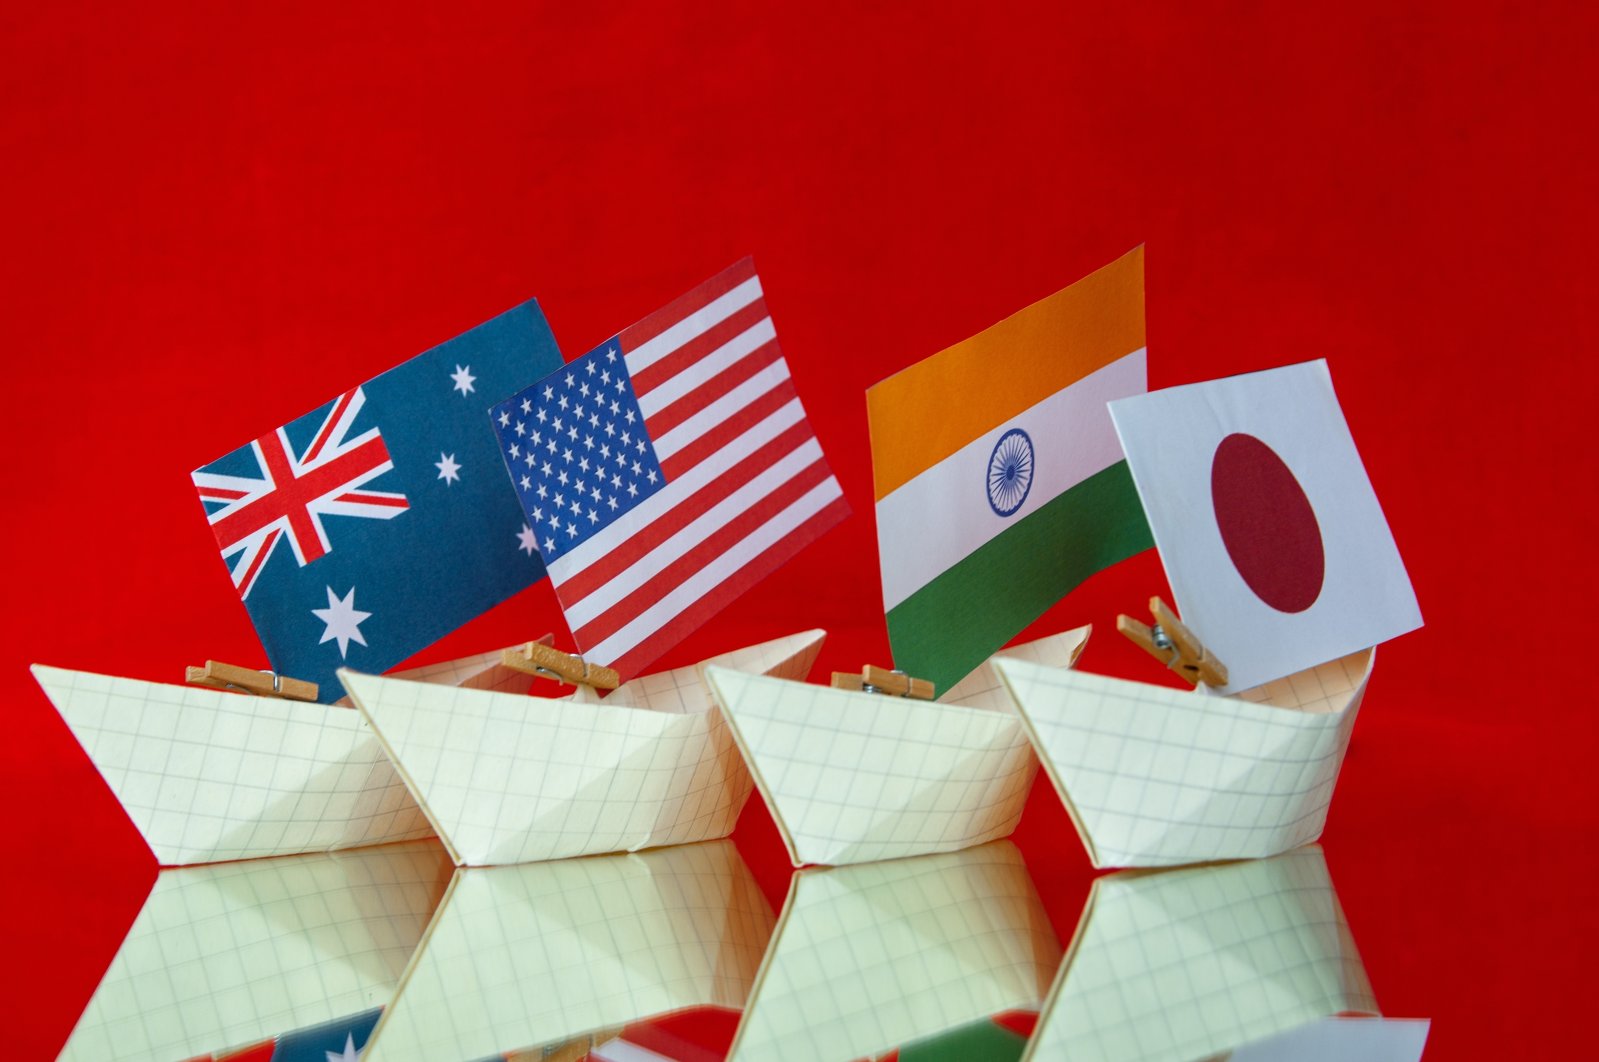 The flags of Australia, the United States, Japan and India are pictured in a reference to the new military alliance and security pact between the countries, called the Quad. (Photo by Shutterstock)